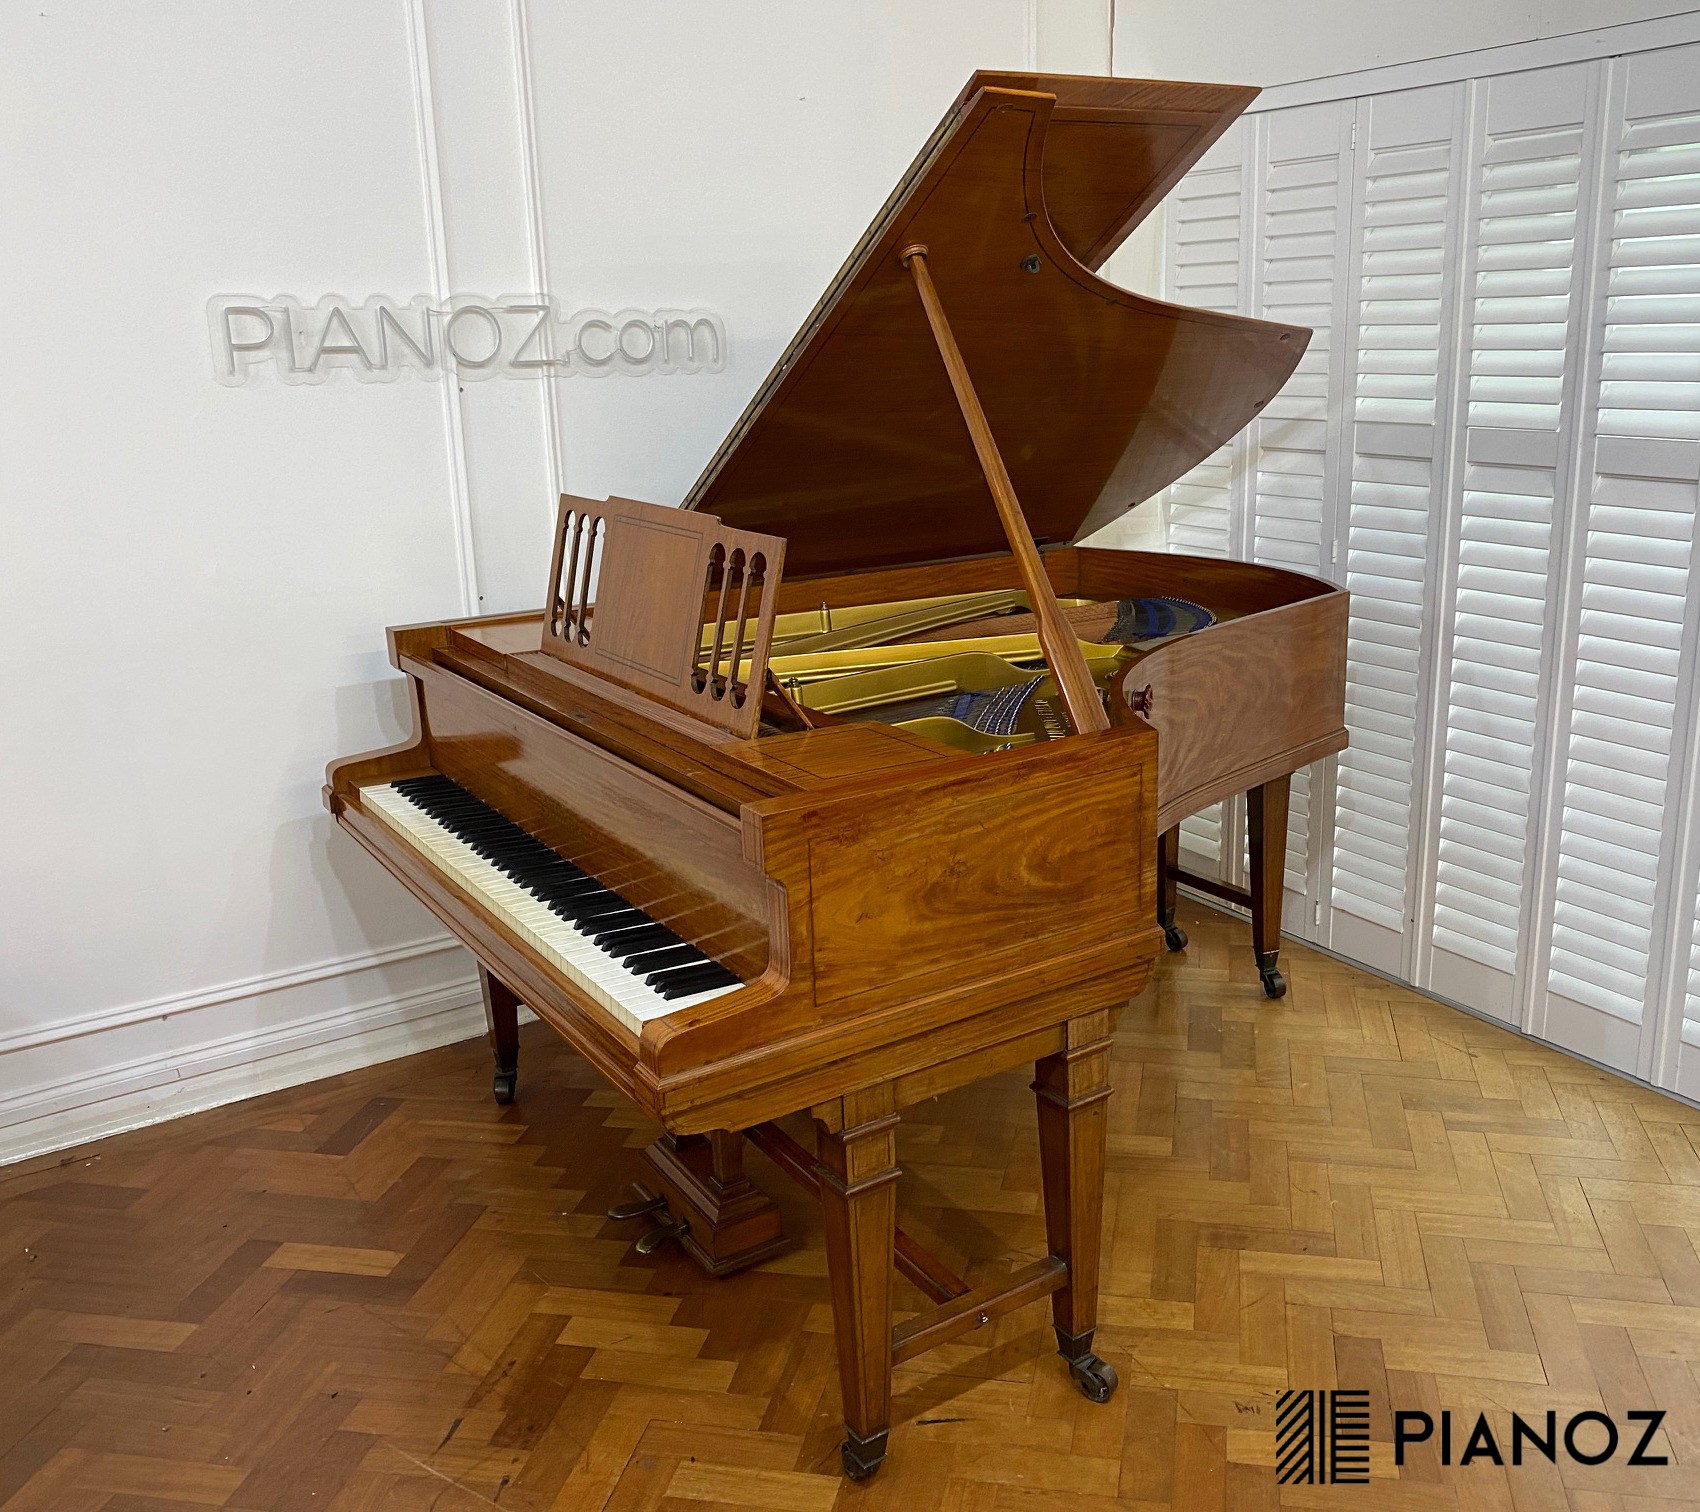 Bluthner Satinwood Grand Piano piano for sale in UK